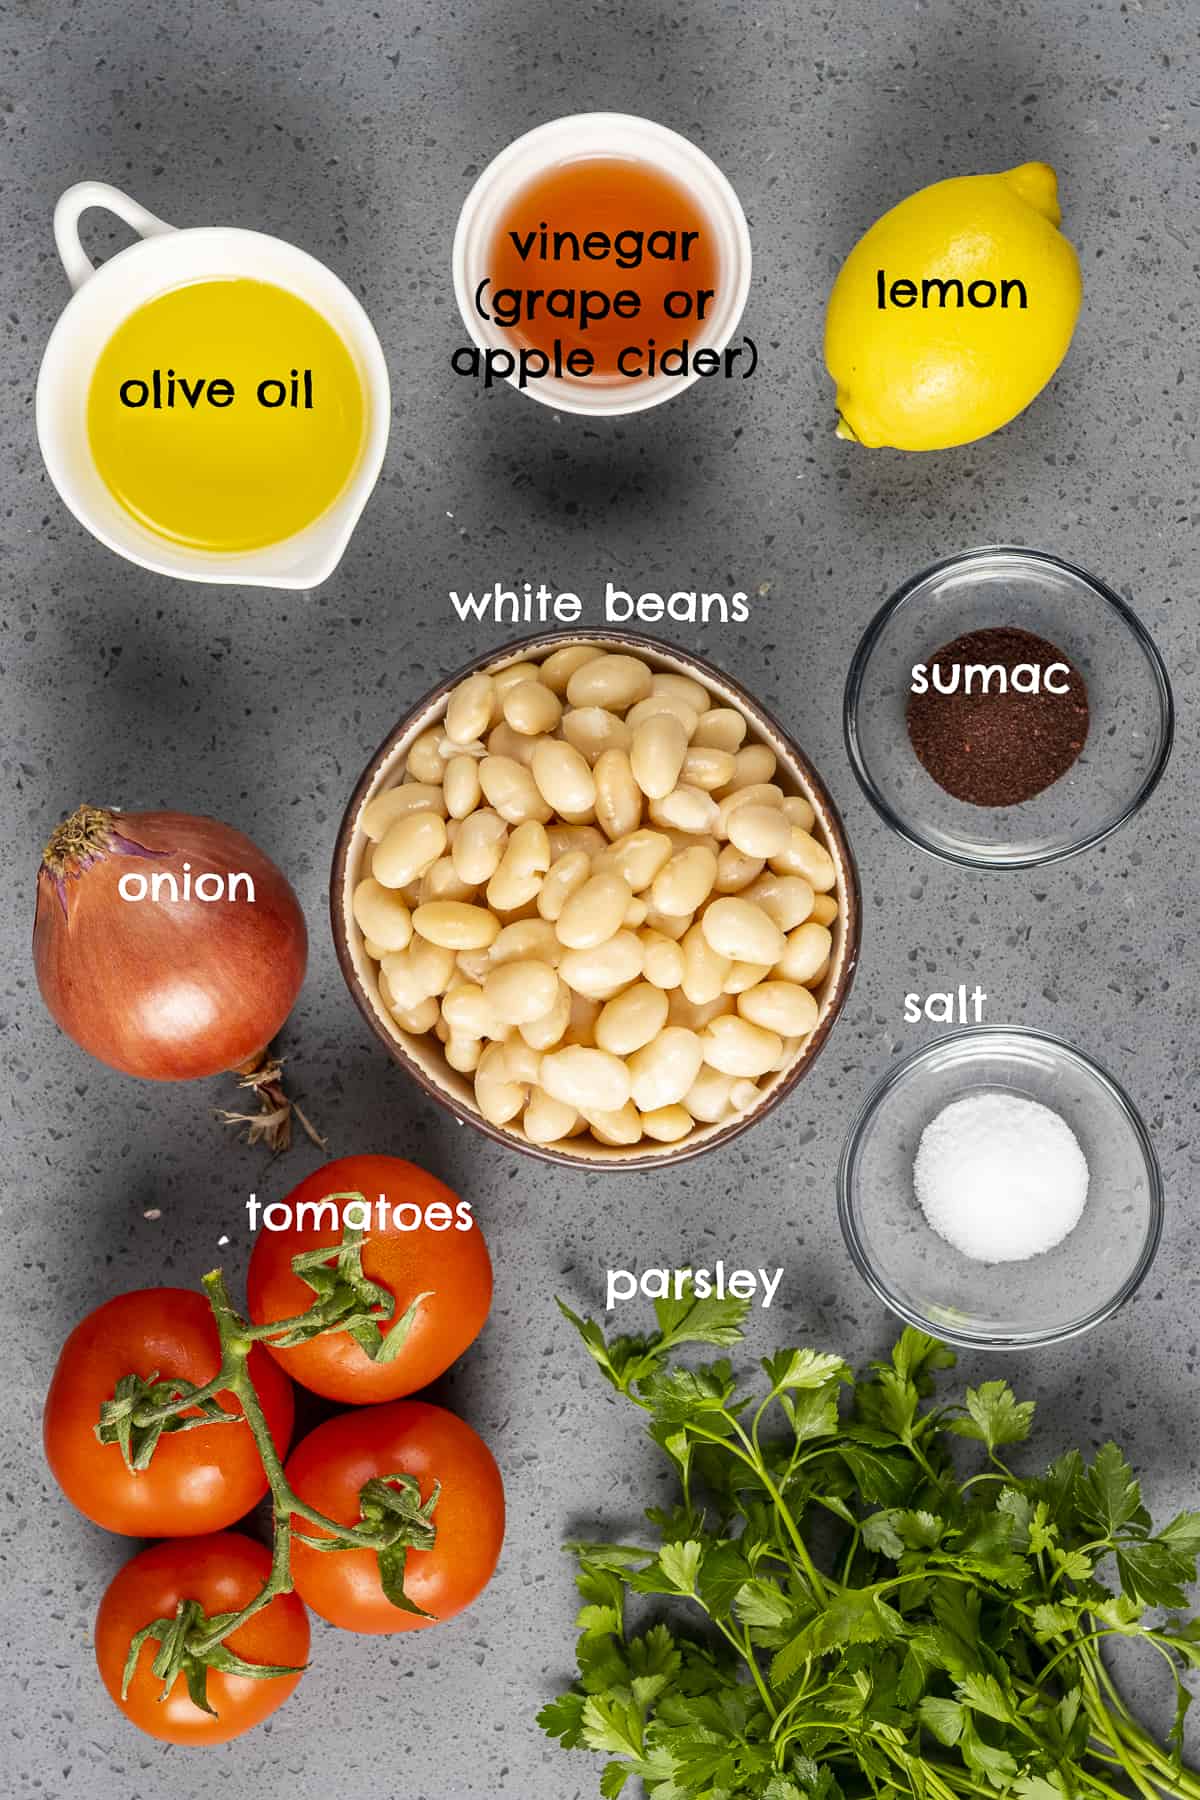 Cooked white beans, tomatoes, olive oil, parsley, lemon, onion, sumac and salt on a grey background.